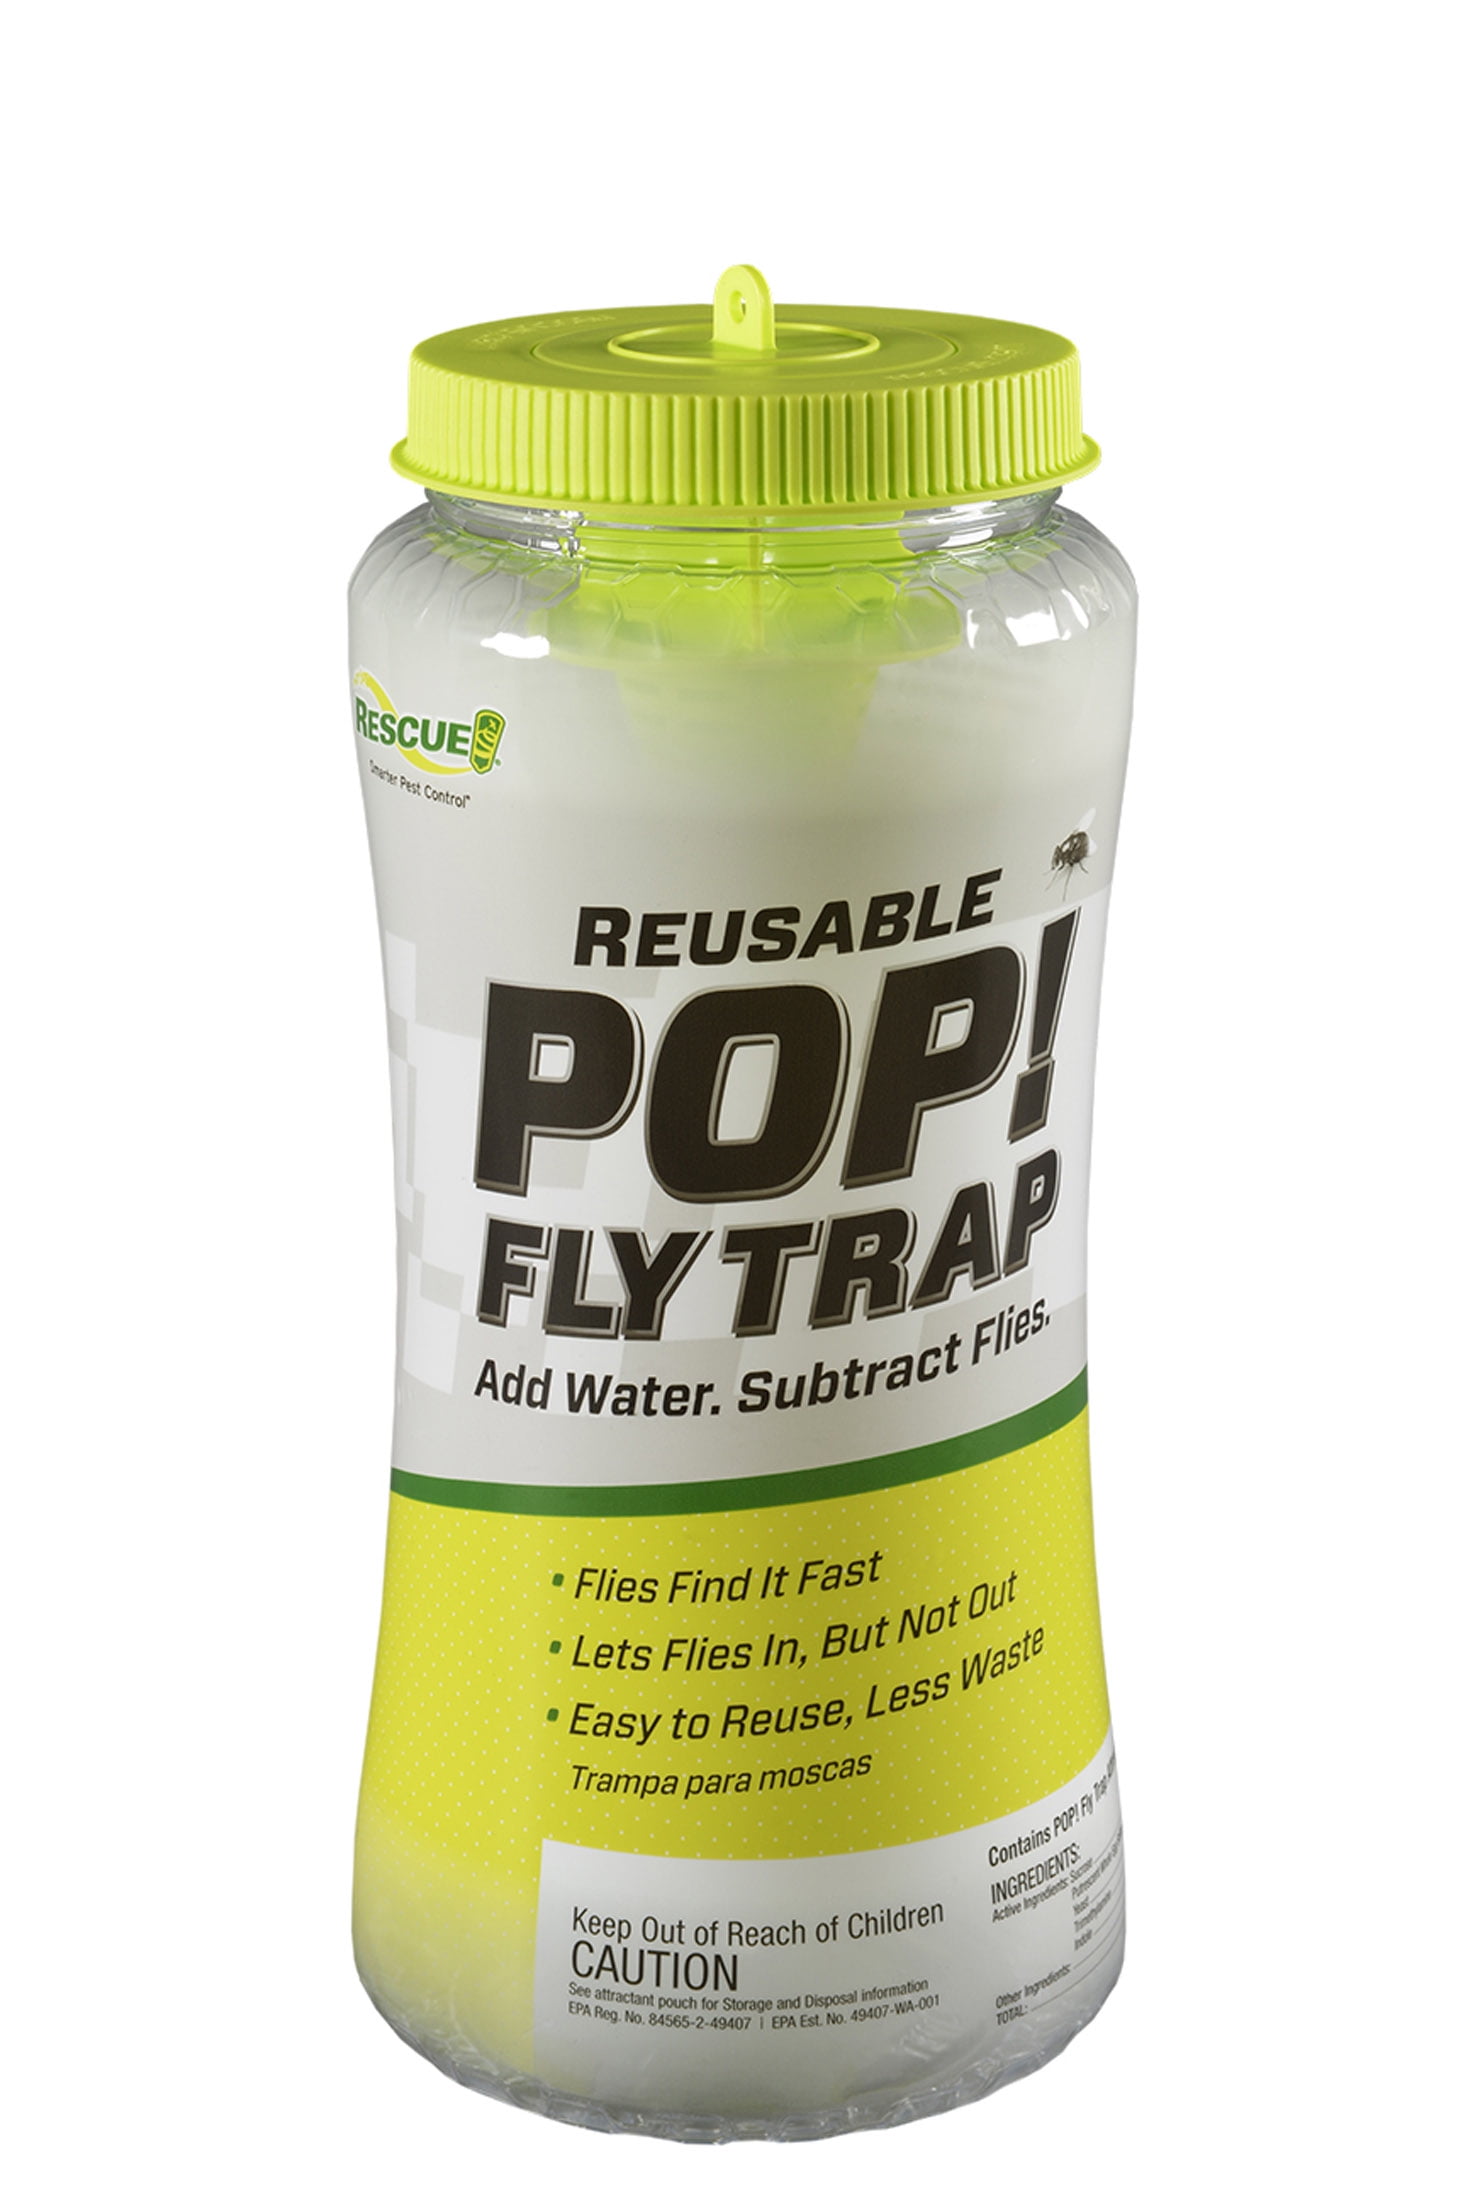 RESCUE Outdoor Reusable Fly Trap Canister FTR-SF4 - The Home Depot